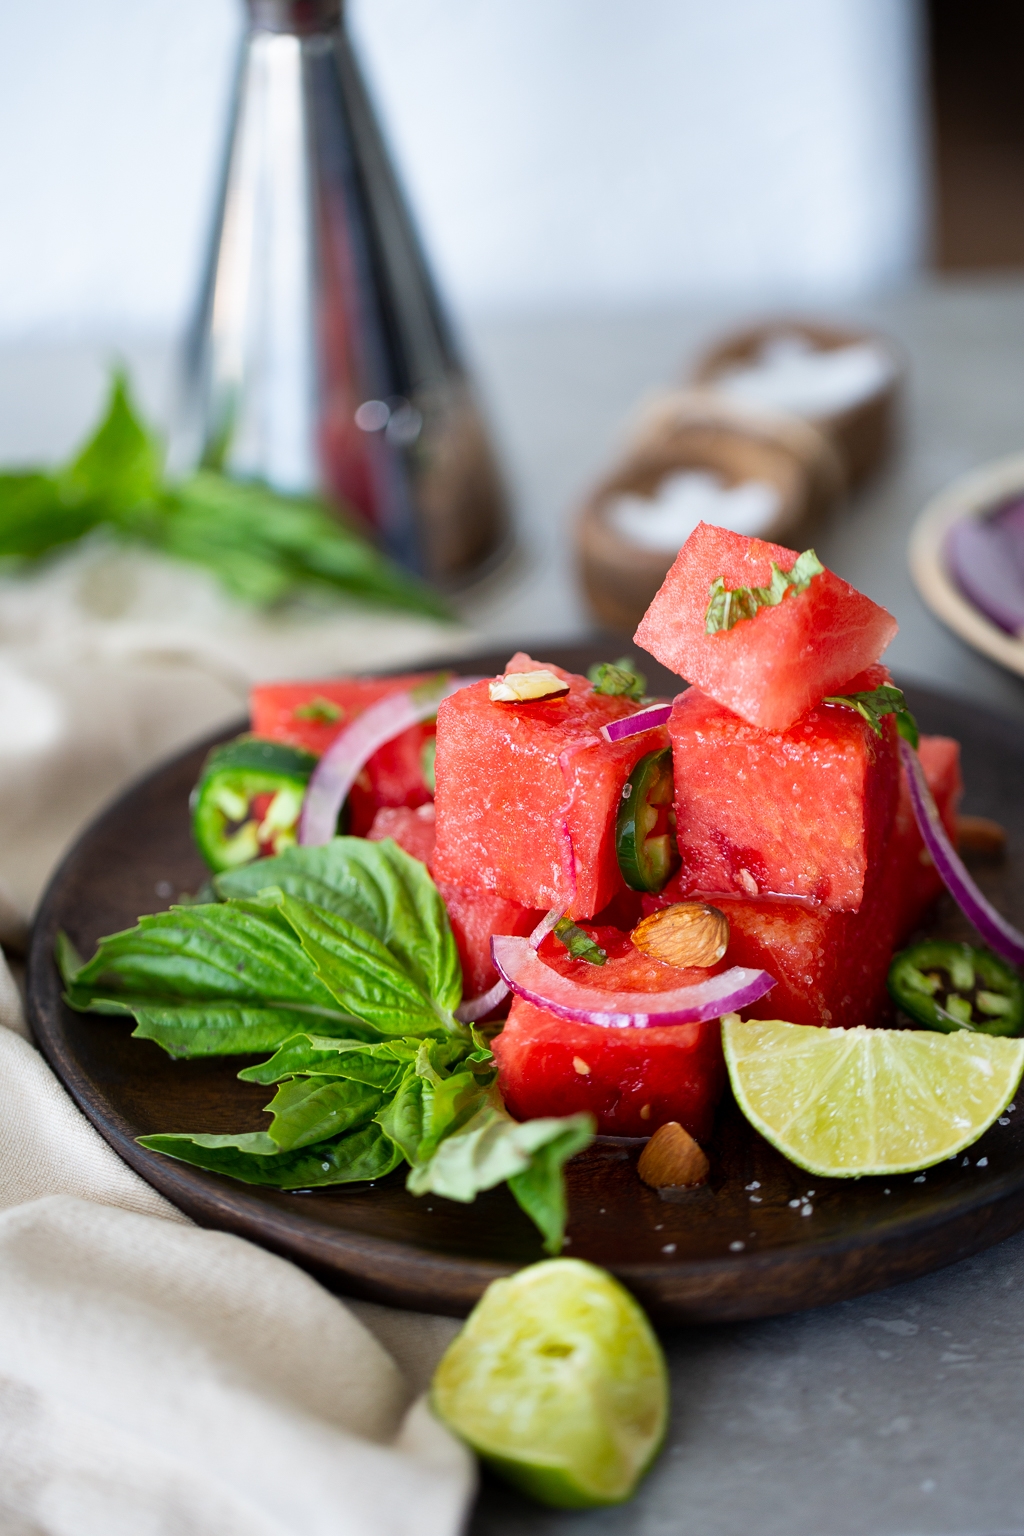 Spicy Watermelon basil salad with toasted almonds and red onion.